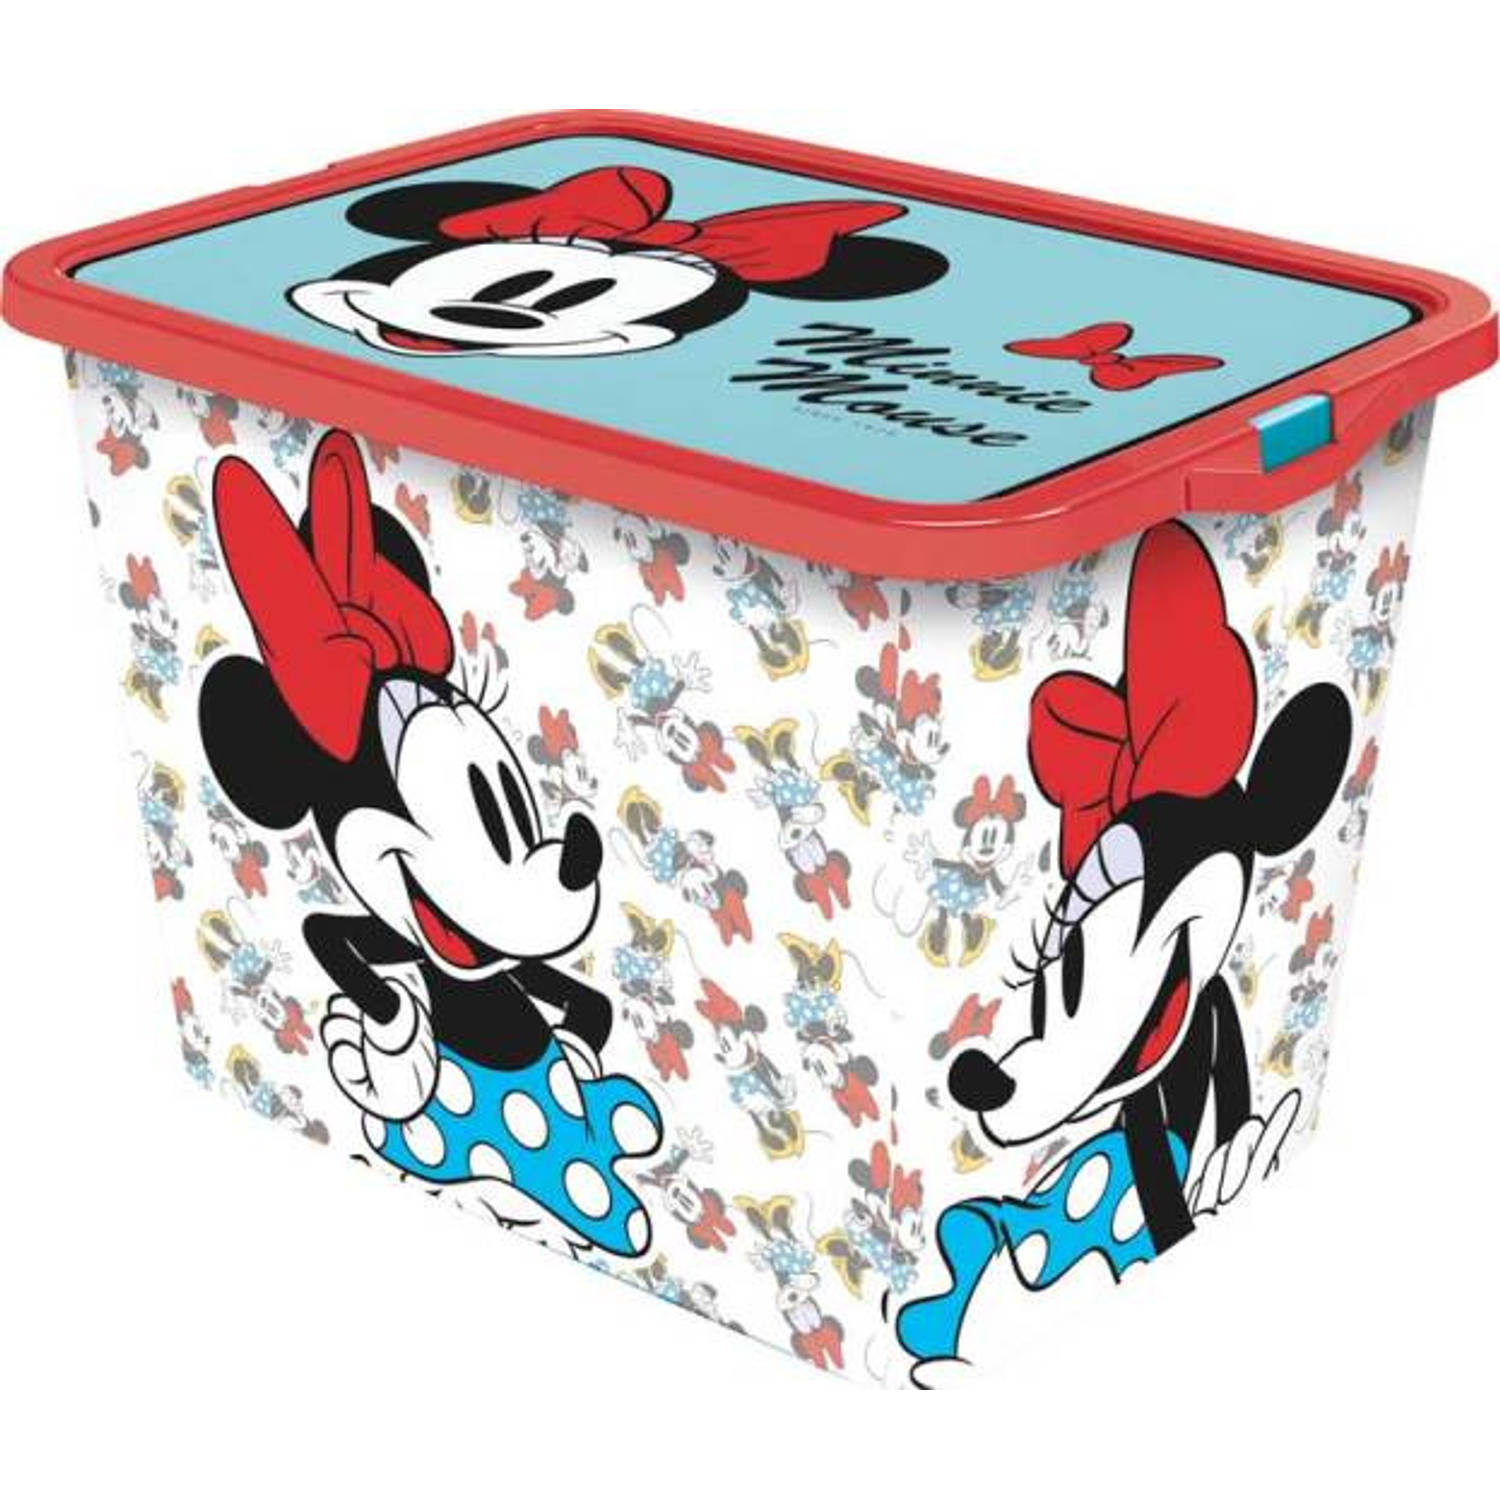 Stor Opbergbox Minnie Mouse 23 Liter Wit/rood